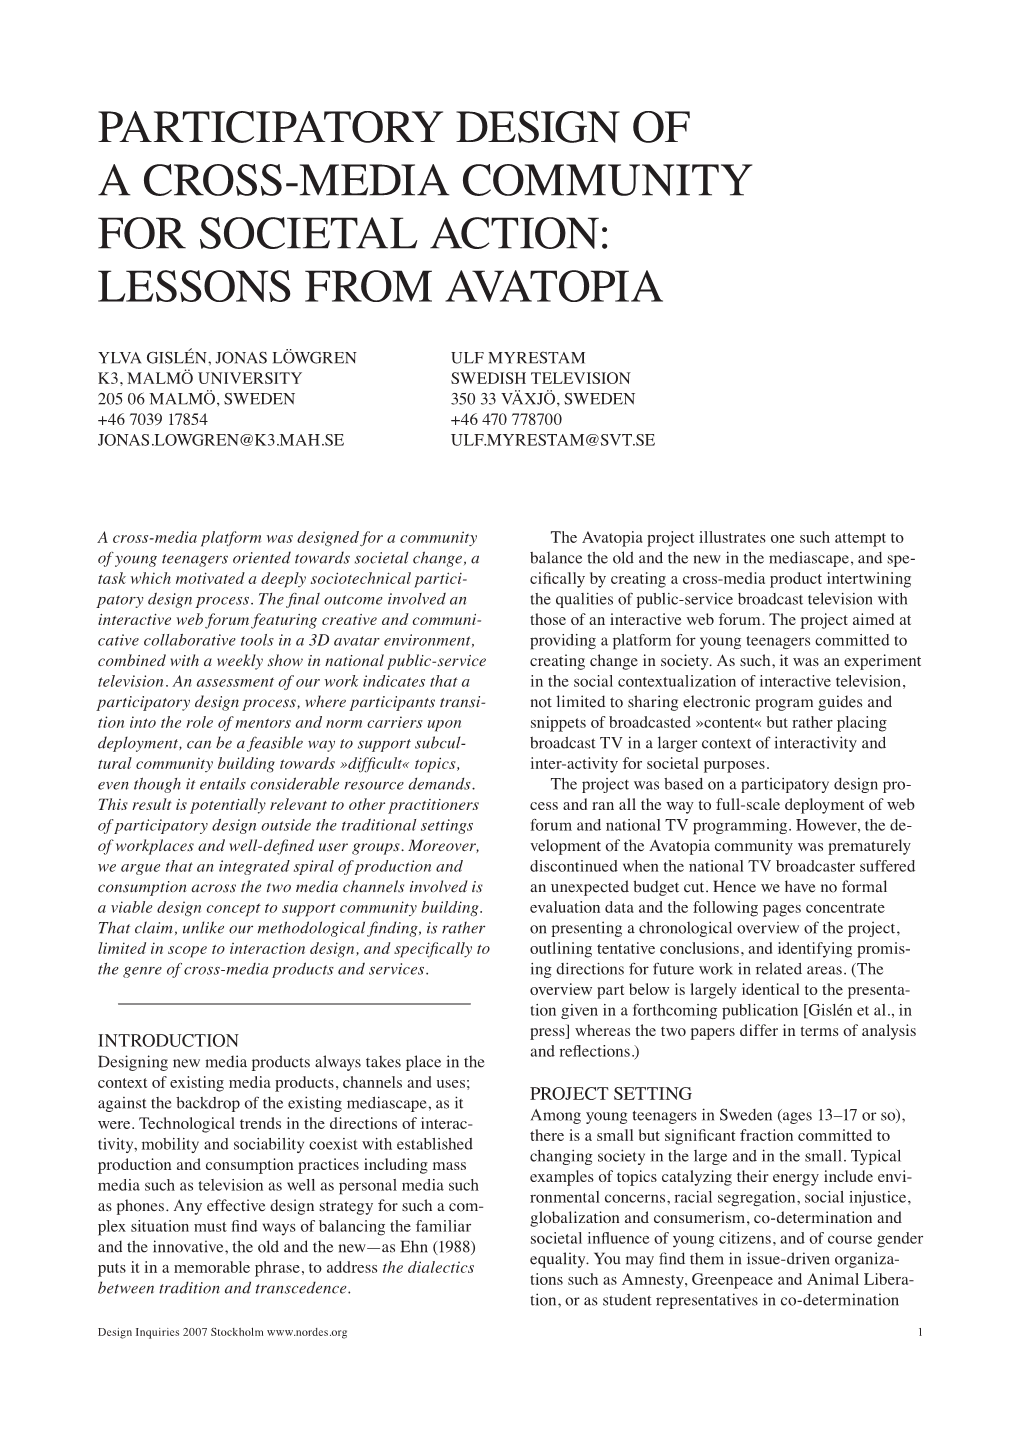 Participatory Design of a Cross-Media Community for Societal Action: Lessons from Avatopia